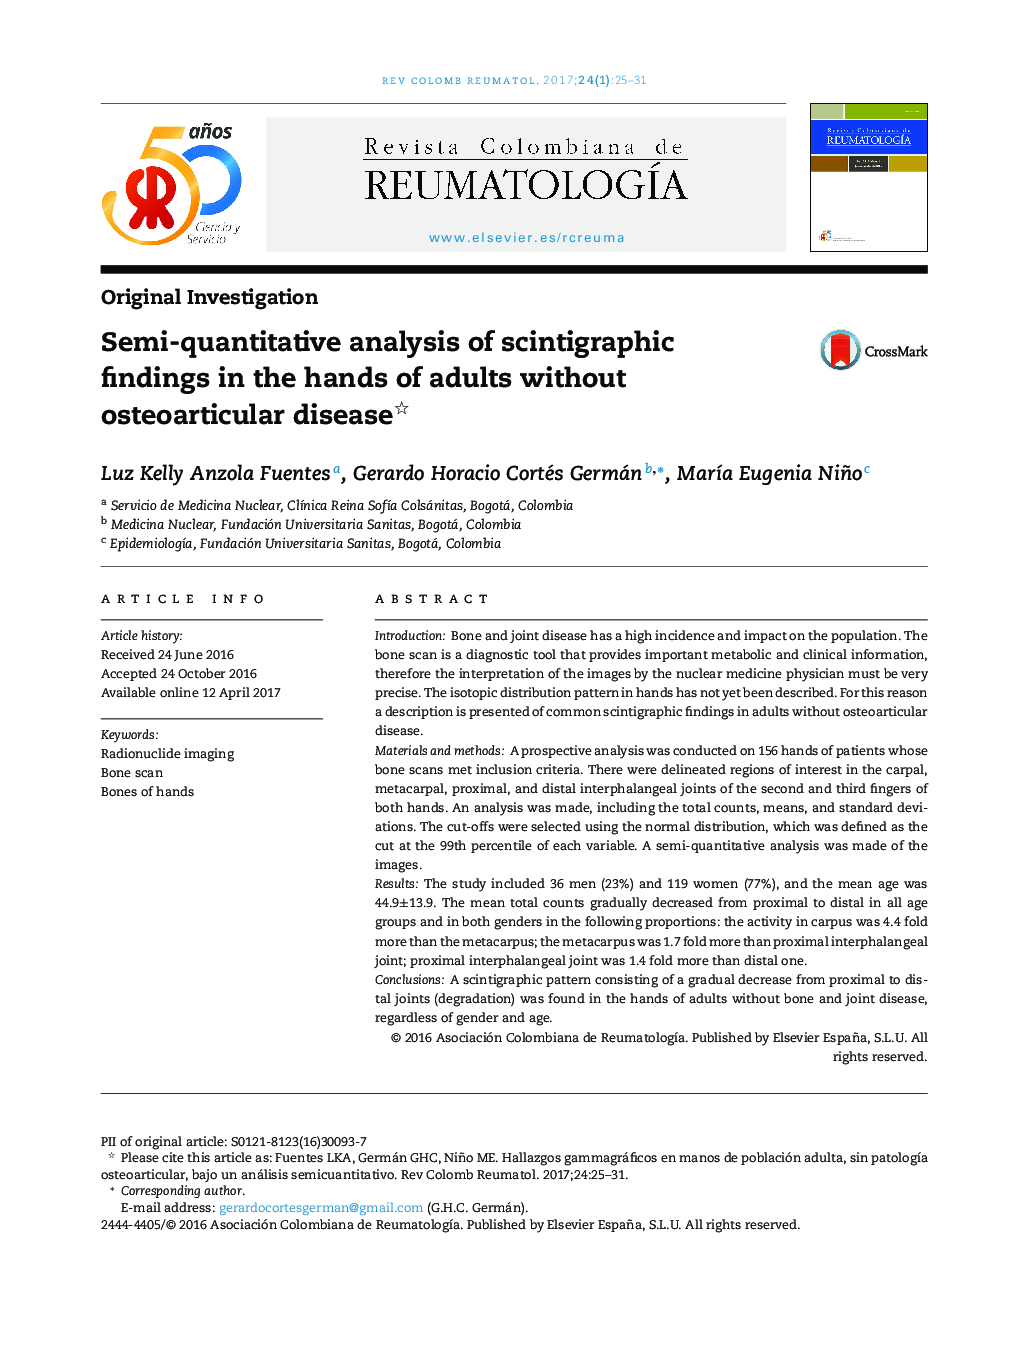 Semi-quantitative analysis of scintigraphic findings in the hands of adults without osteoarticular disease